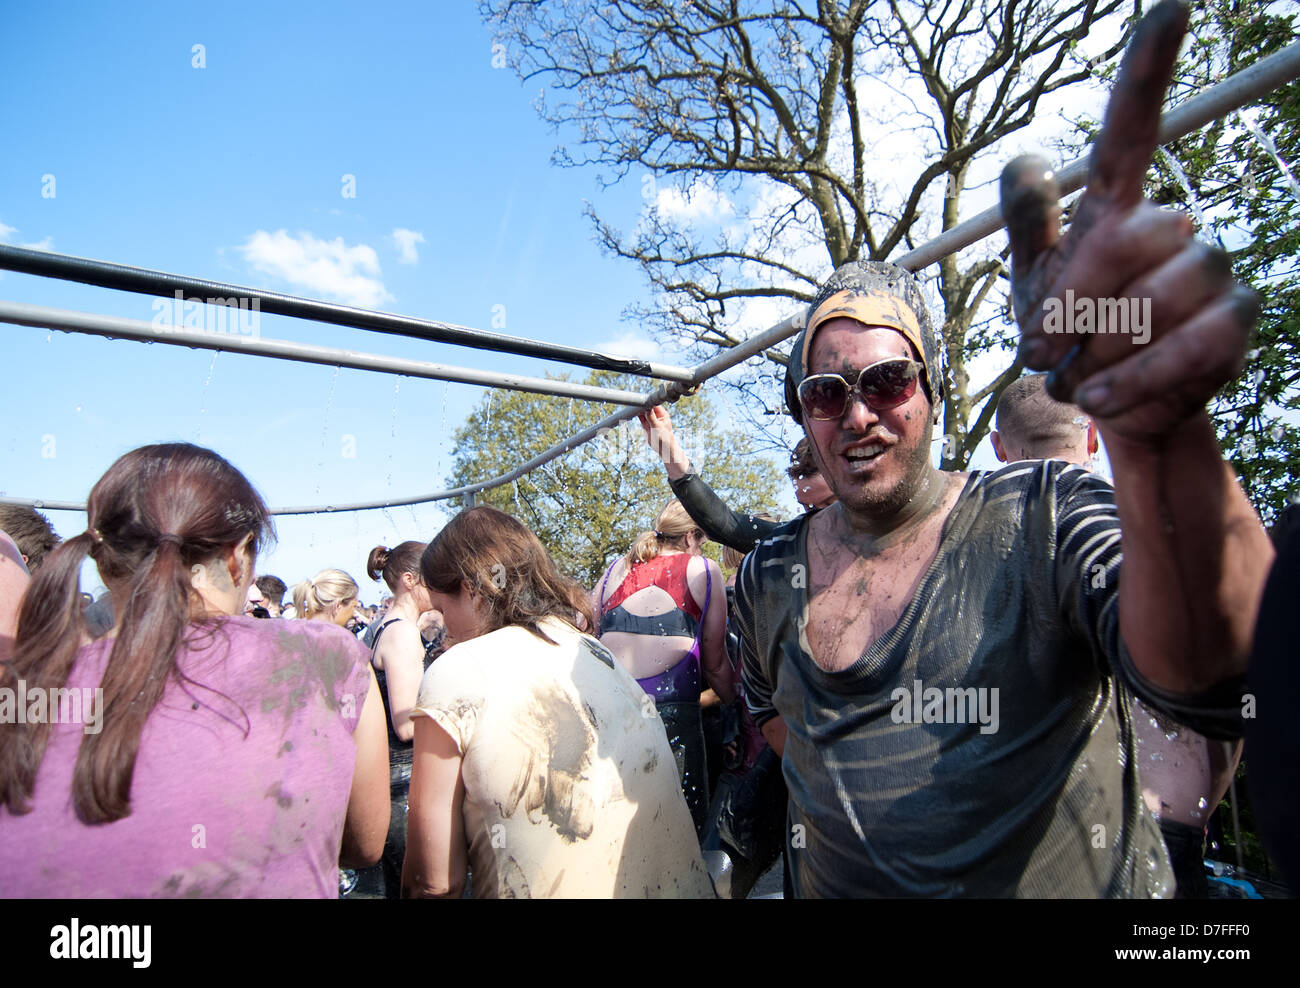 Man dressed as Elvis Presley cleans himself off after the 2013 Mud race. Stock Photo